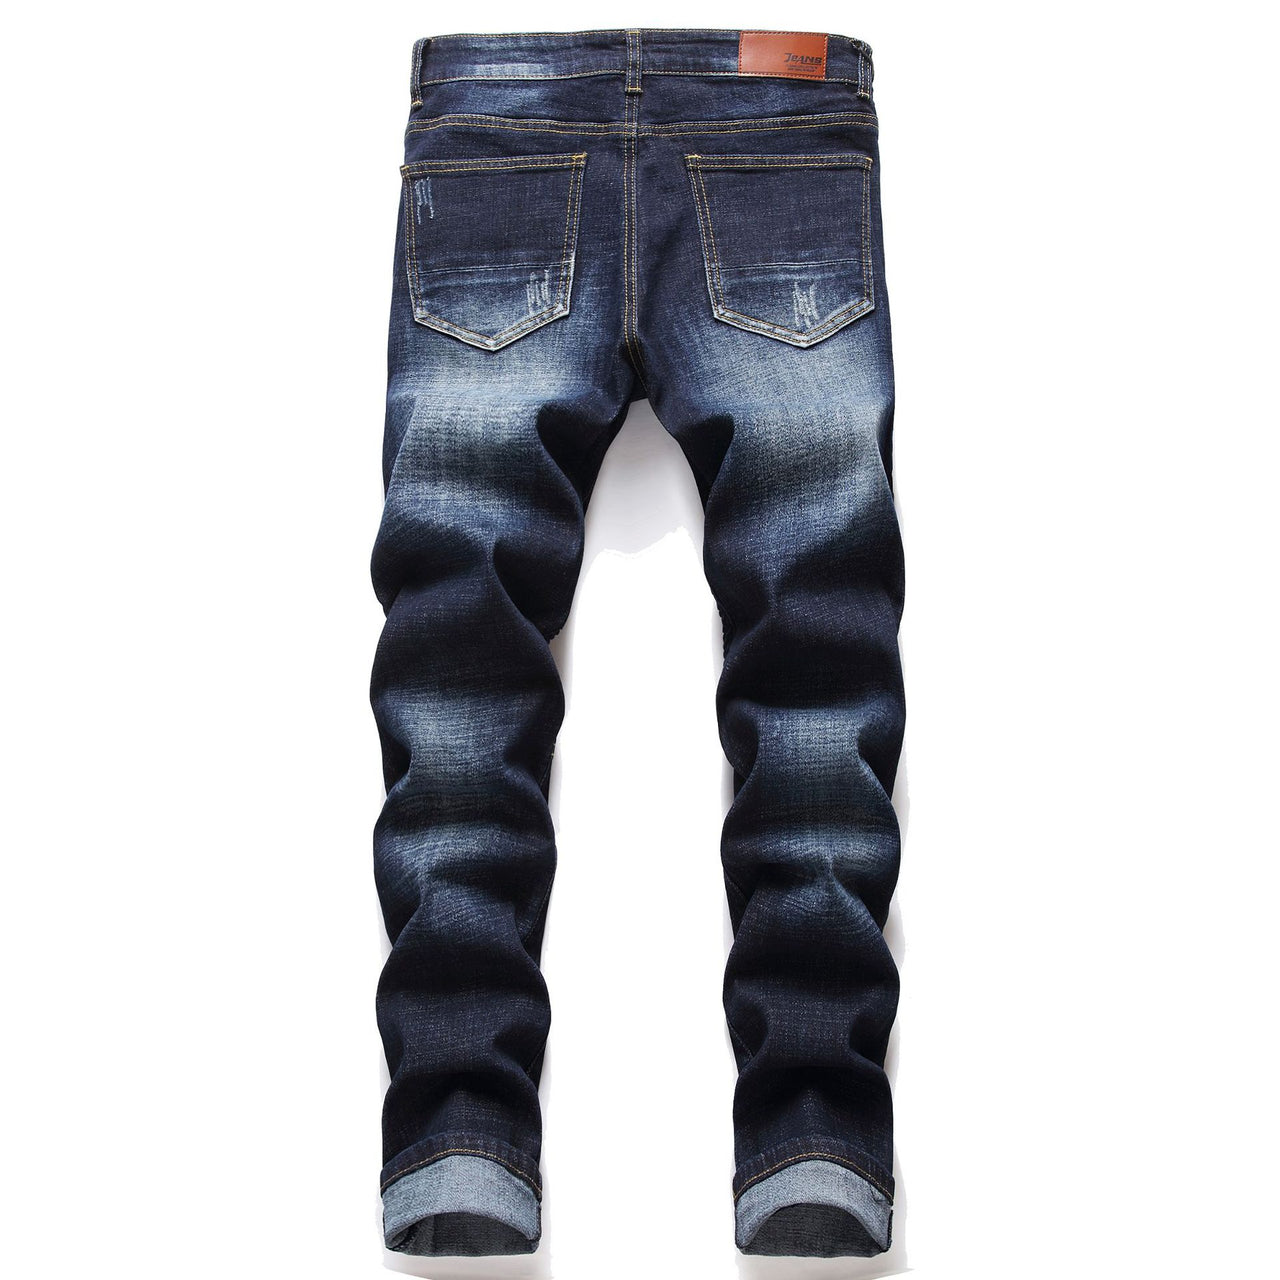 Men's Motorcycle Pleated Slim Stretch Jeans